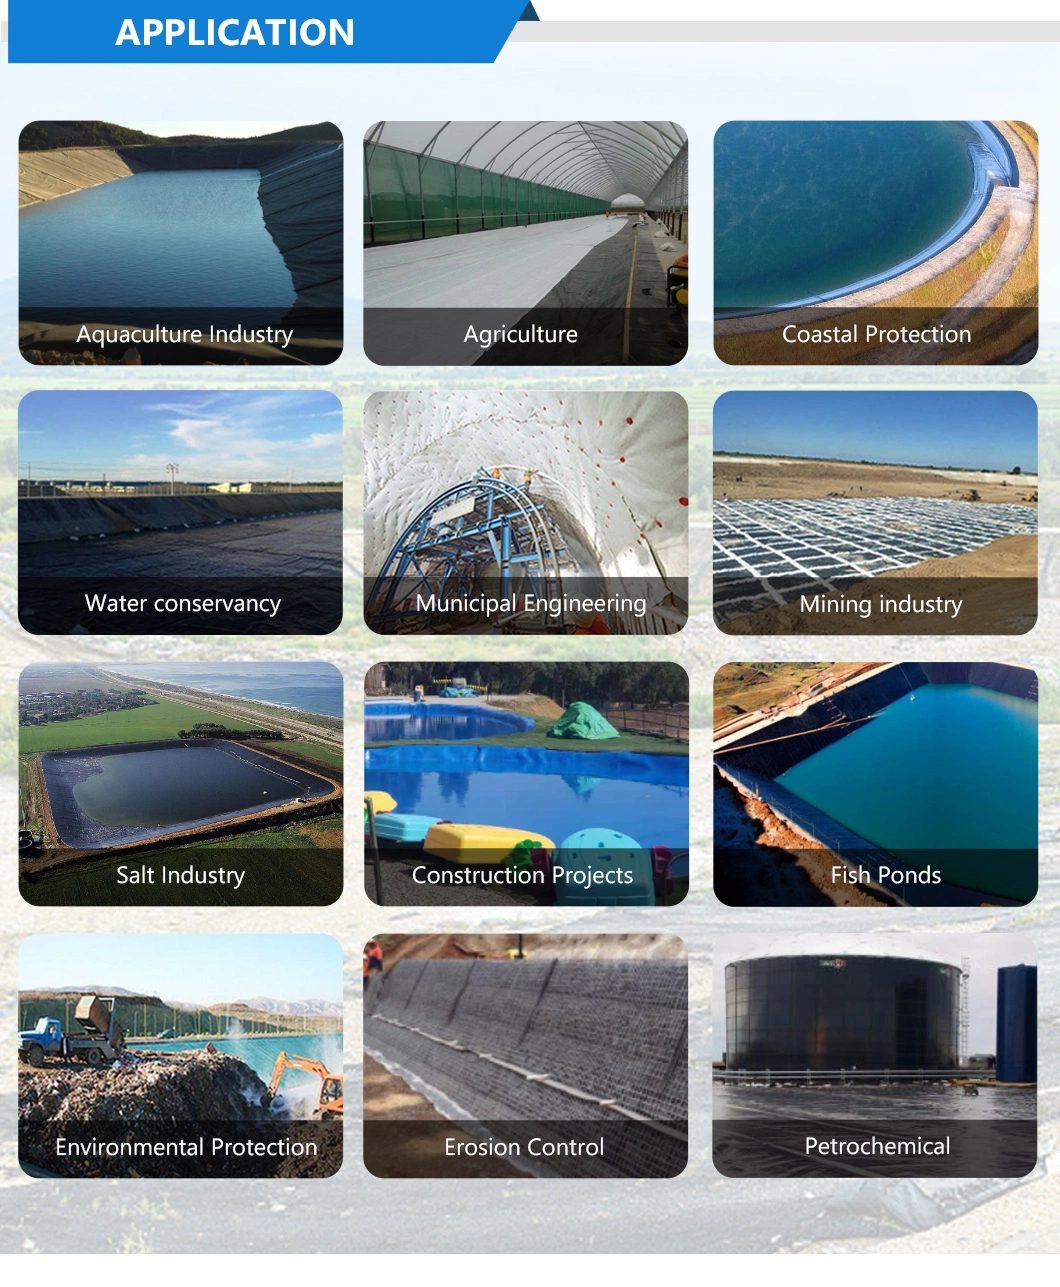 0.3/0.5/0.75/1.0/1.5/2.0mm ASTM Anti-Seepage Waterproof Impermeable Smooth Textured HDPE/LDPE/PE/EV/Ecb/PVC /Composite Geomembrane Manufacturer